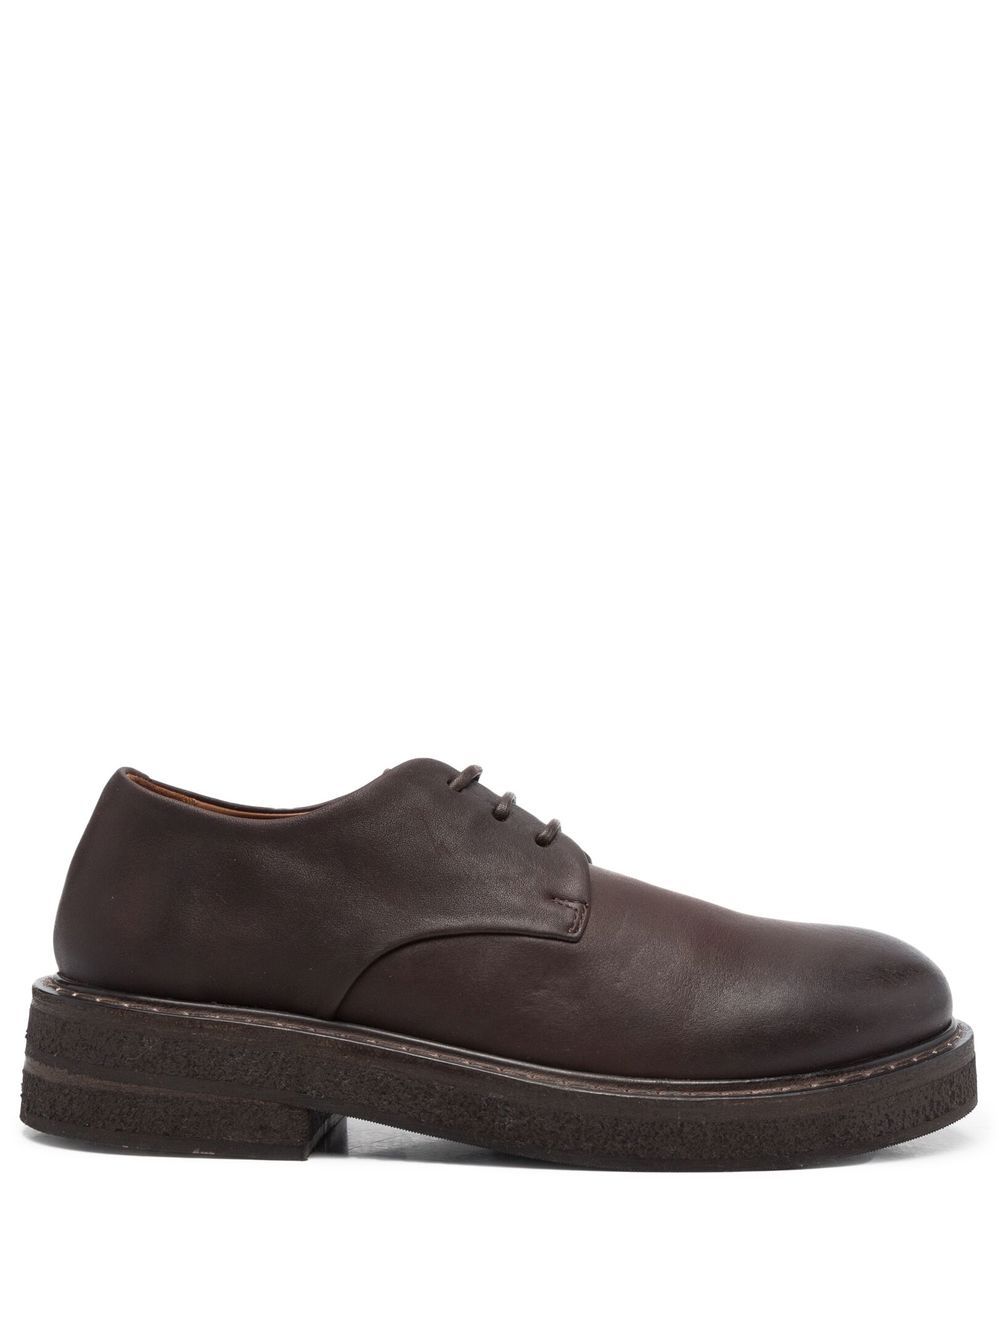 Marsèll lace-up leather Oxford shoes - Brown von Marsèll